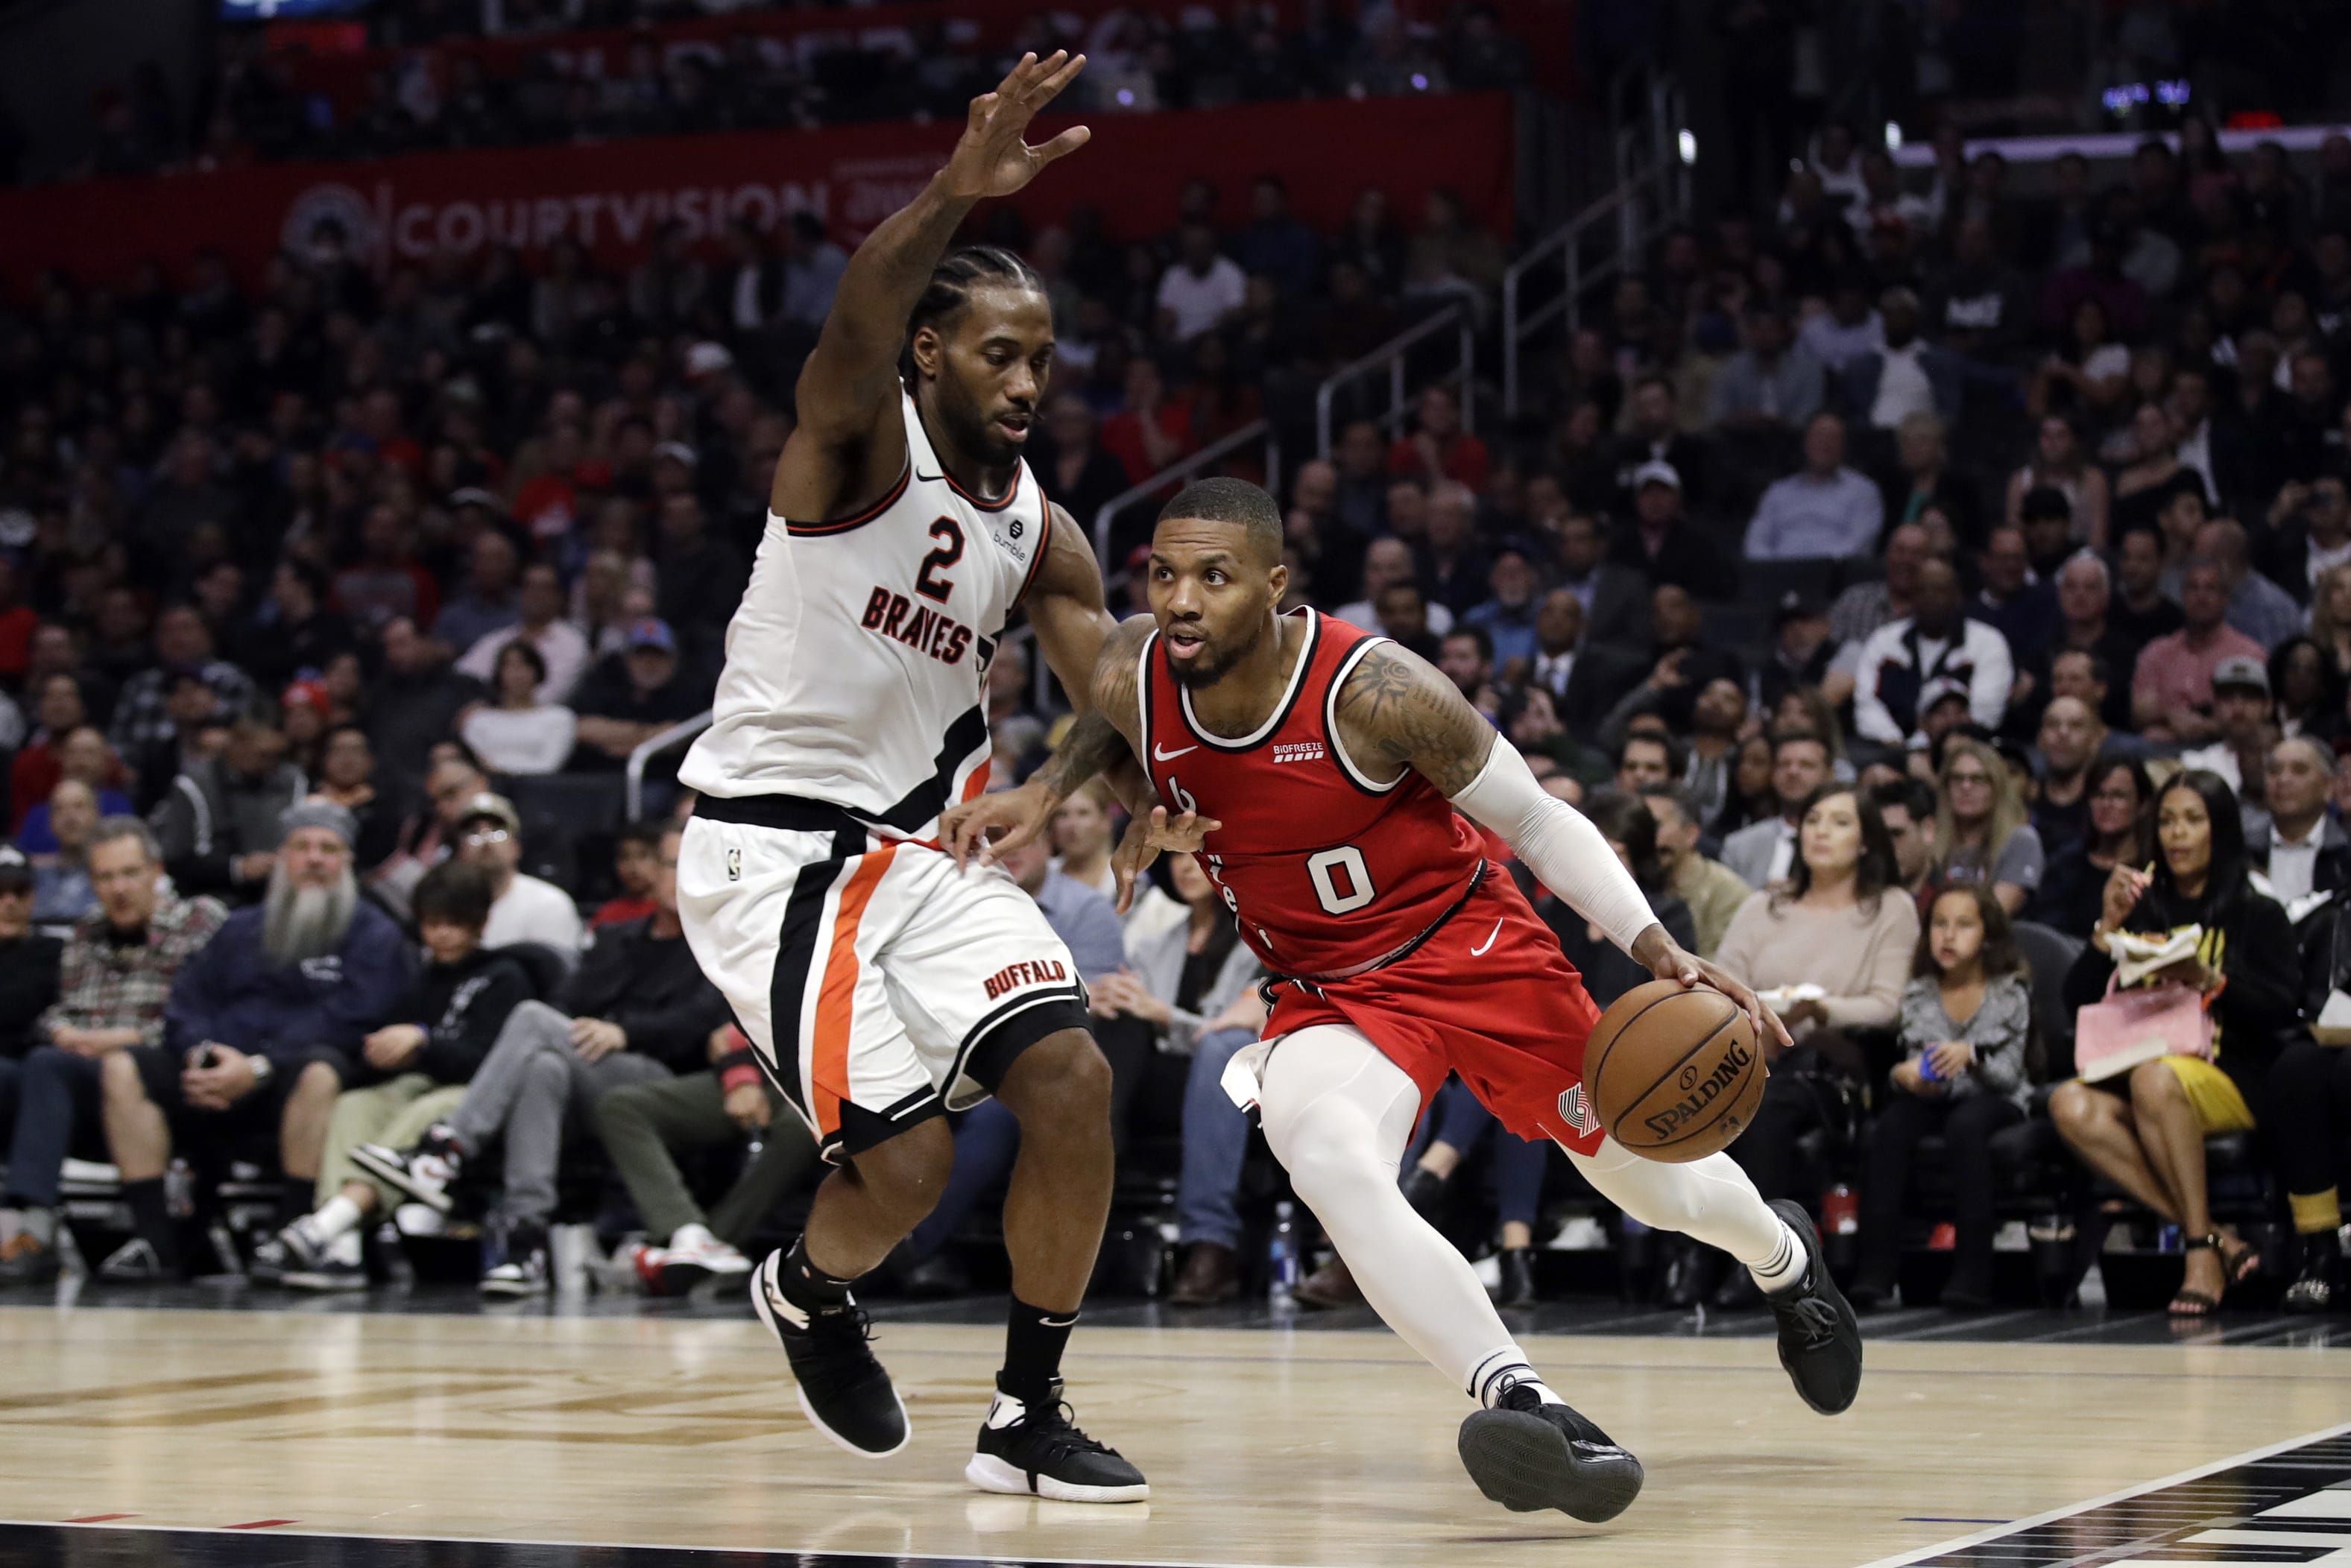 Blazers clipped by Leonard in L.A. - The Columbian